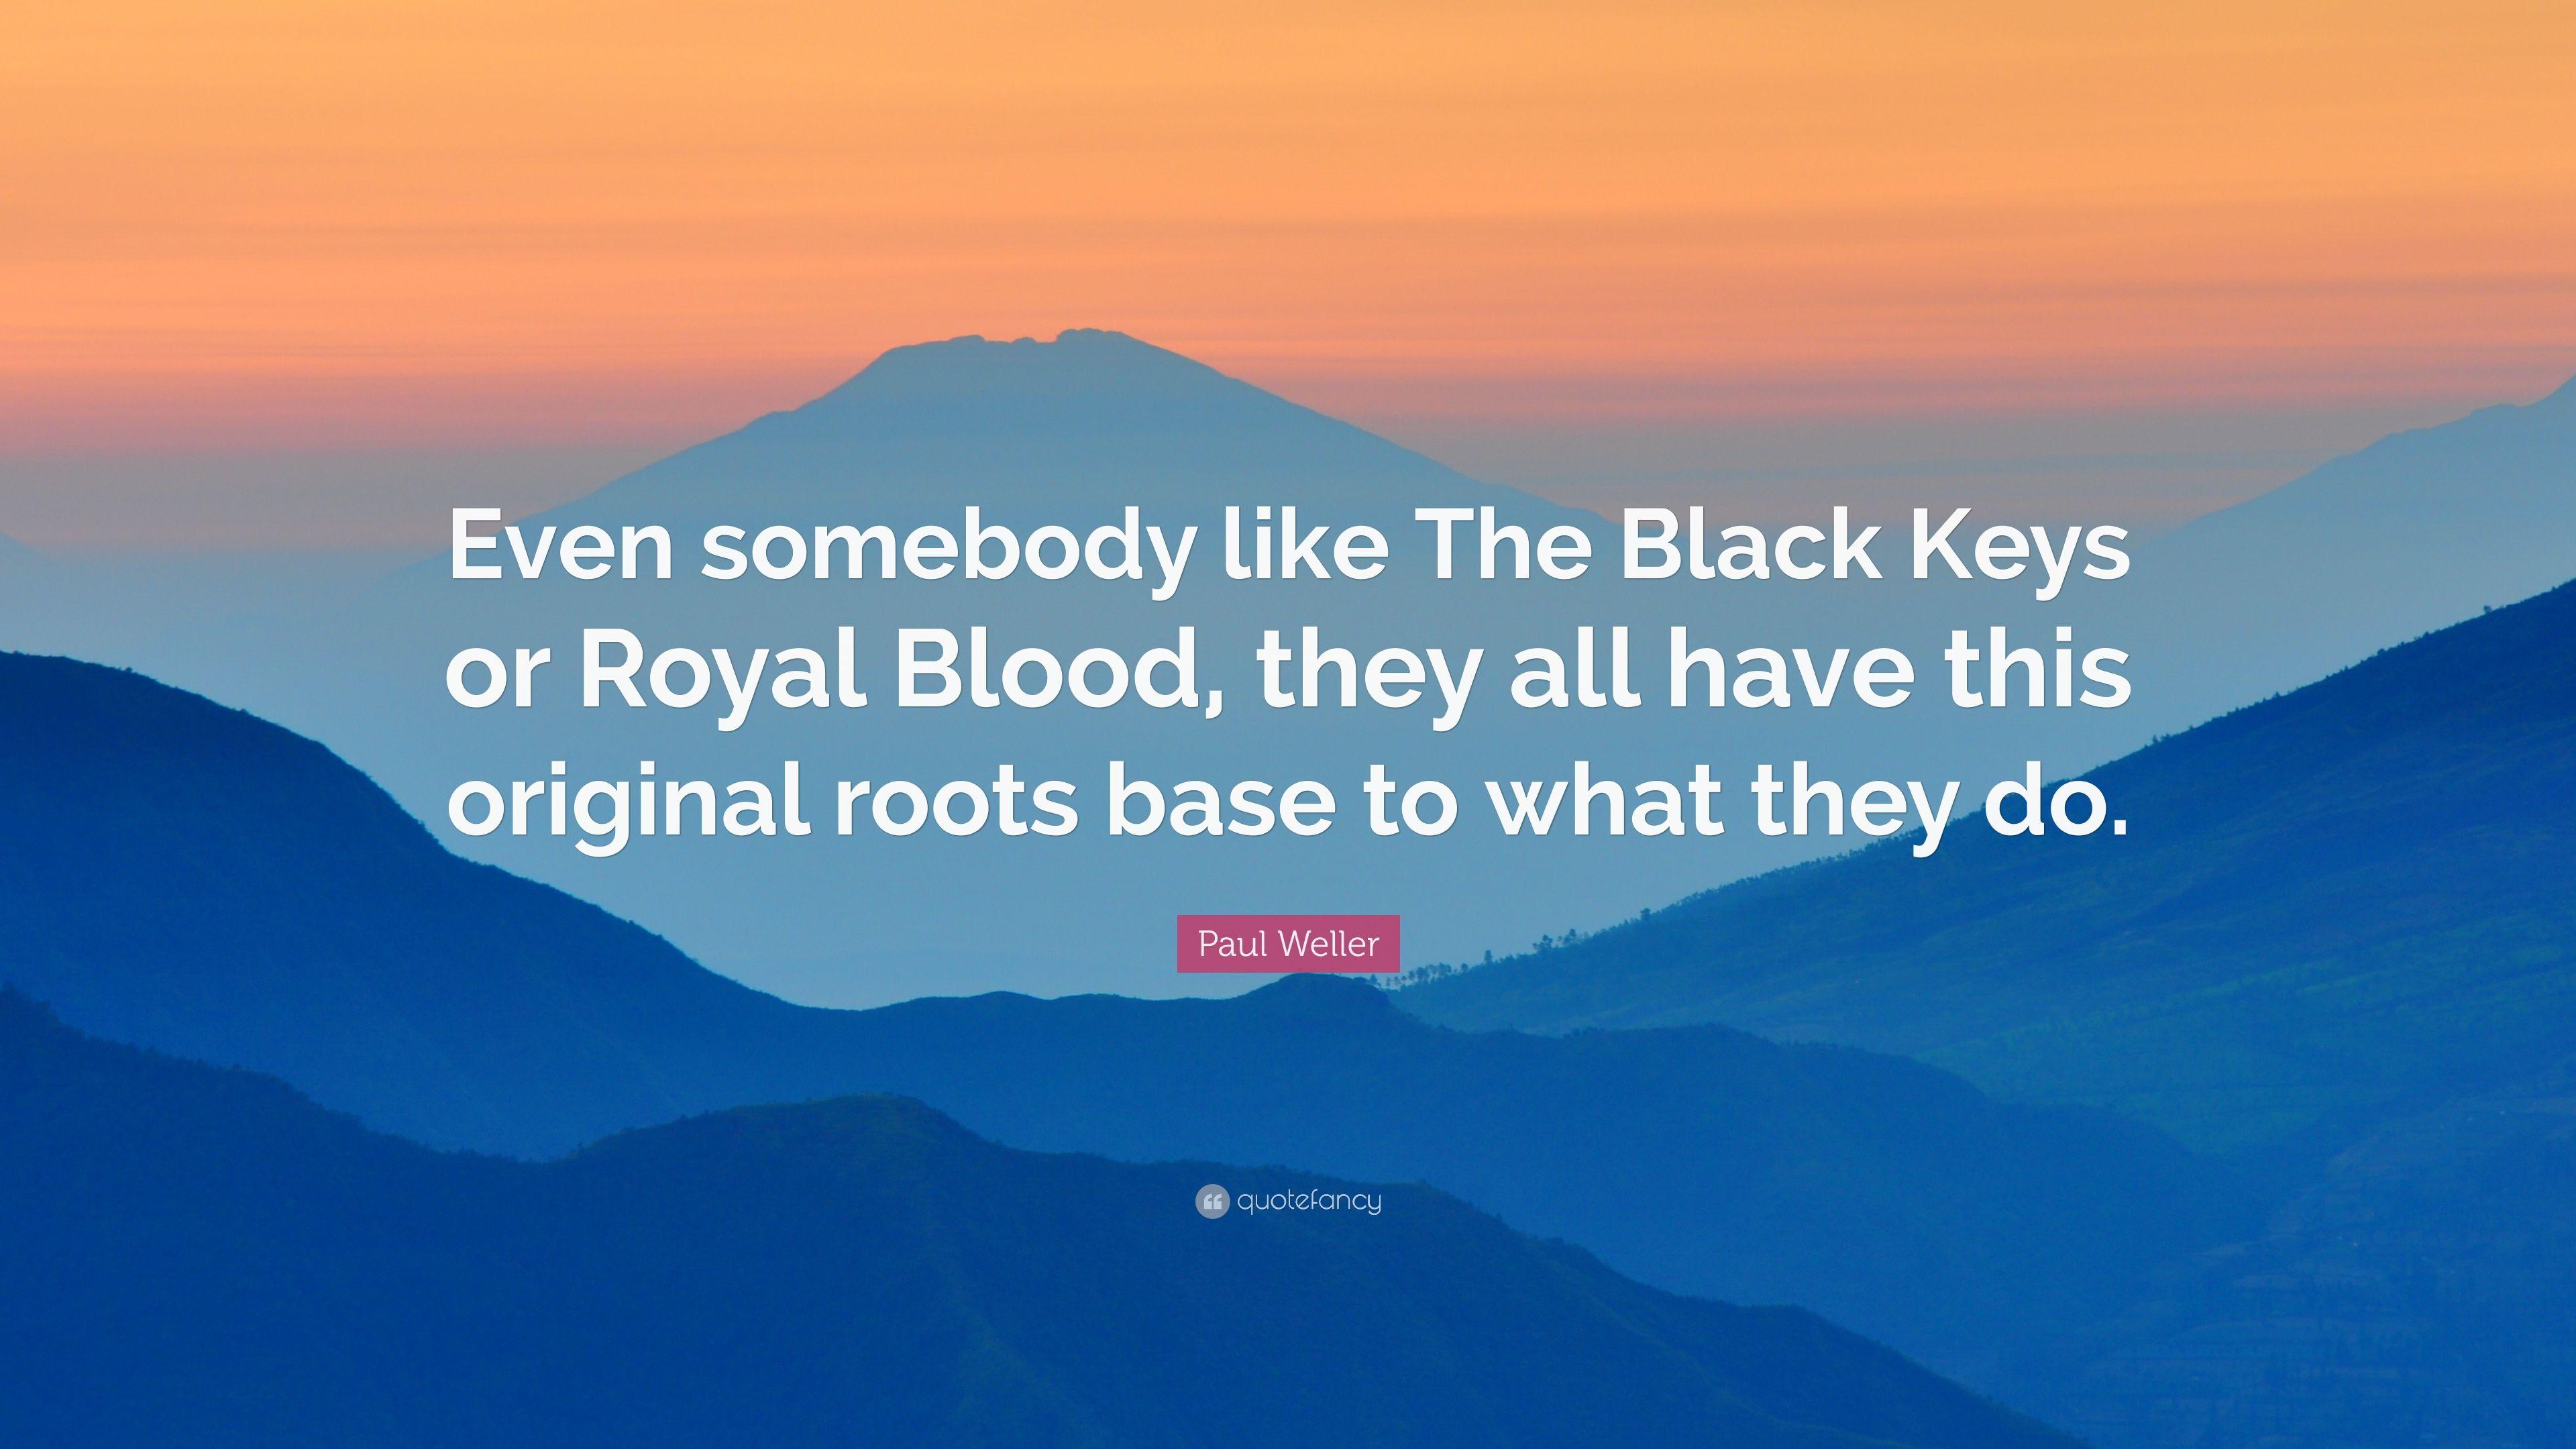 Paul Weller Quote: “Even somebody like The Black Keys or Royal